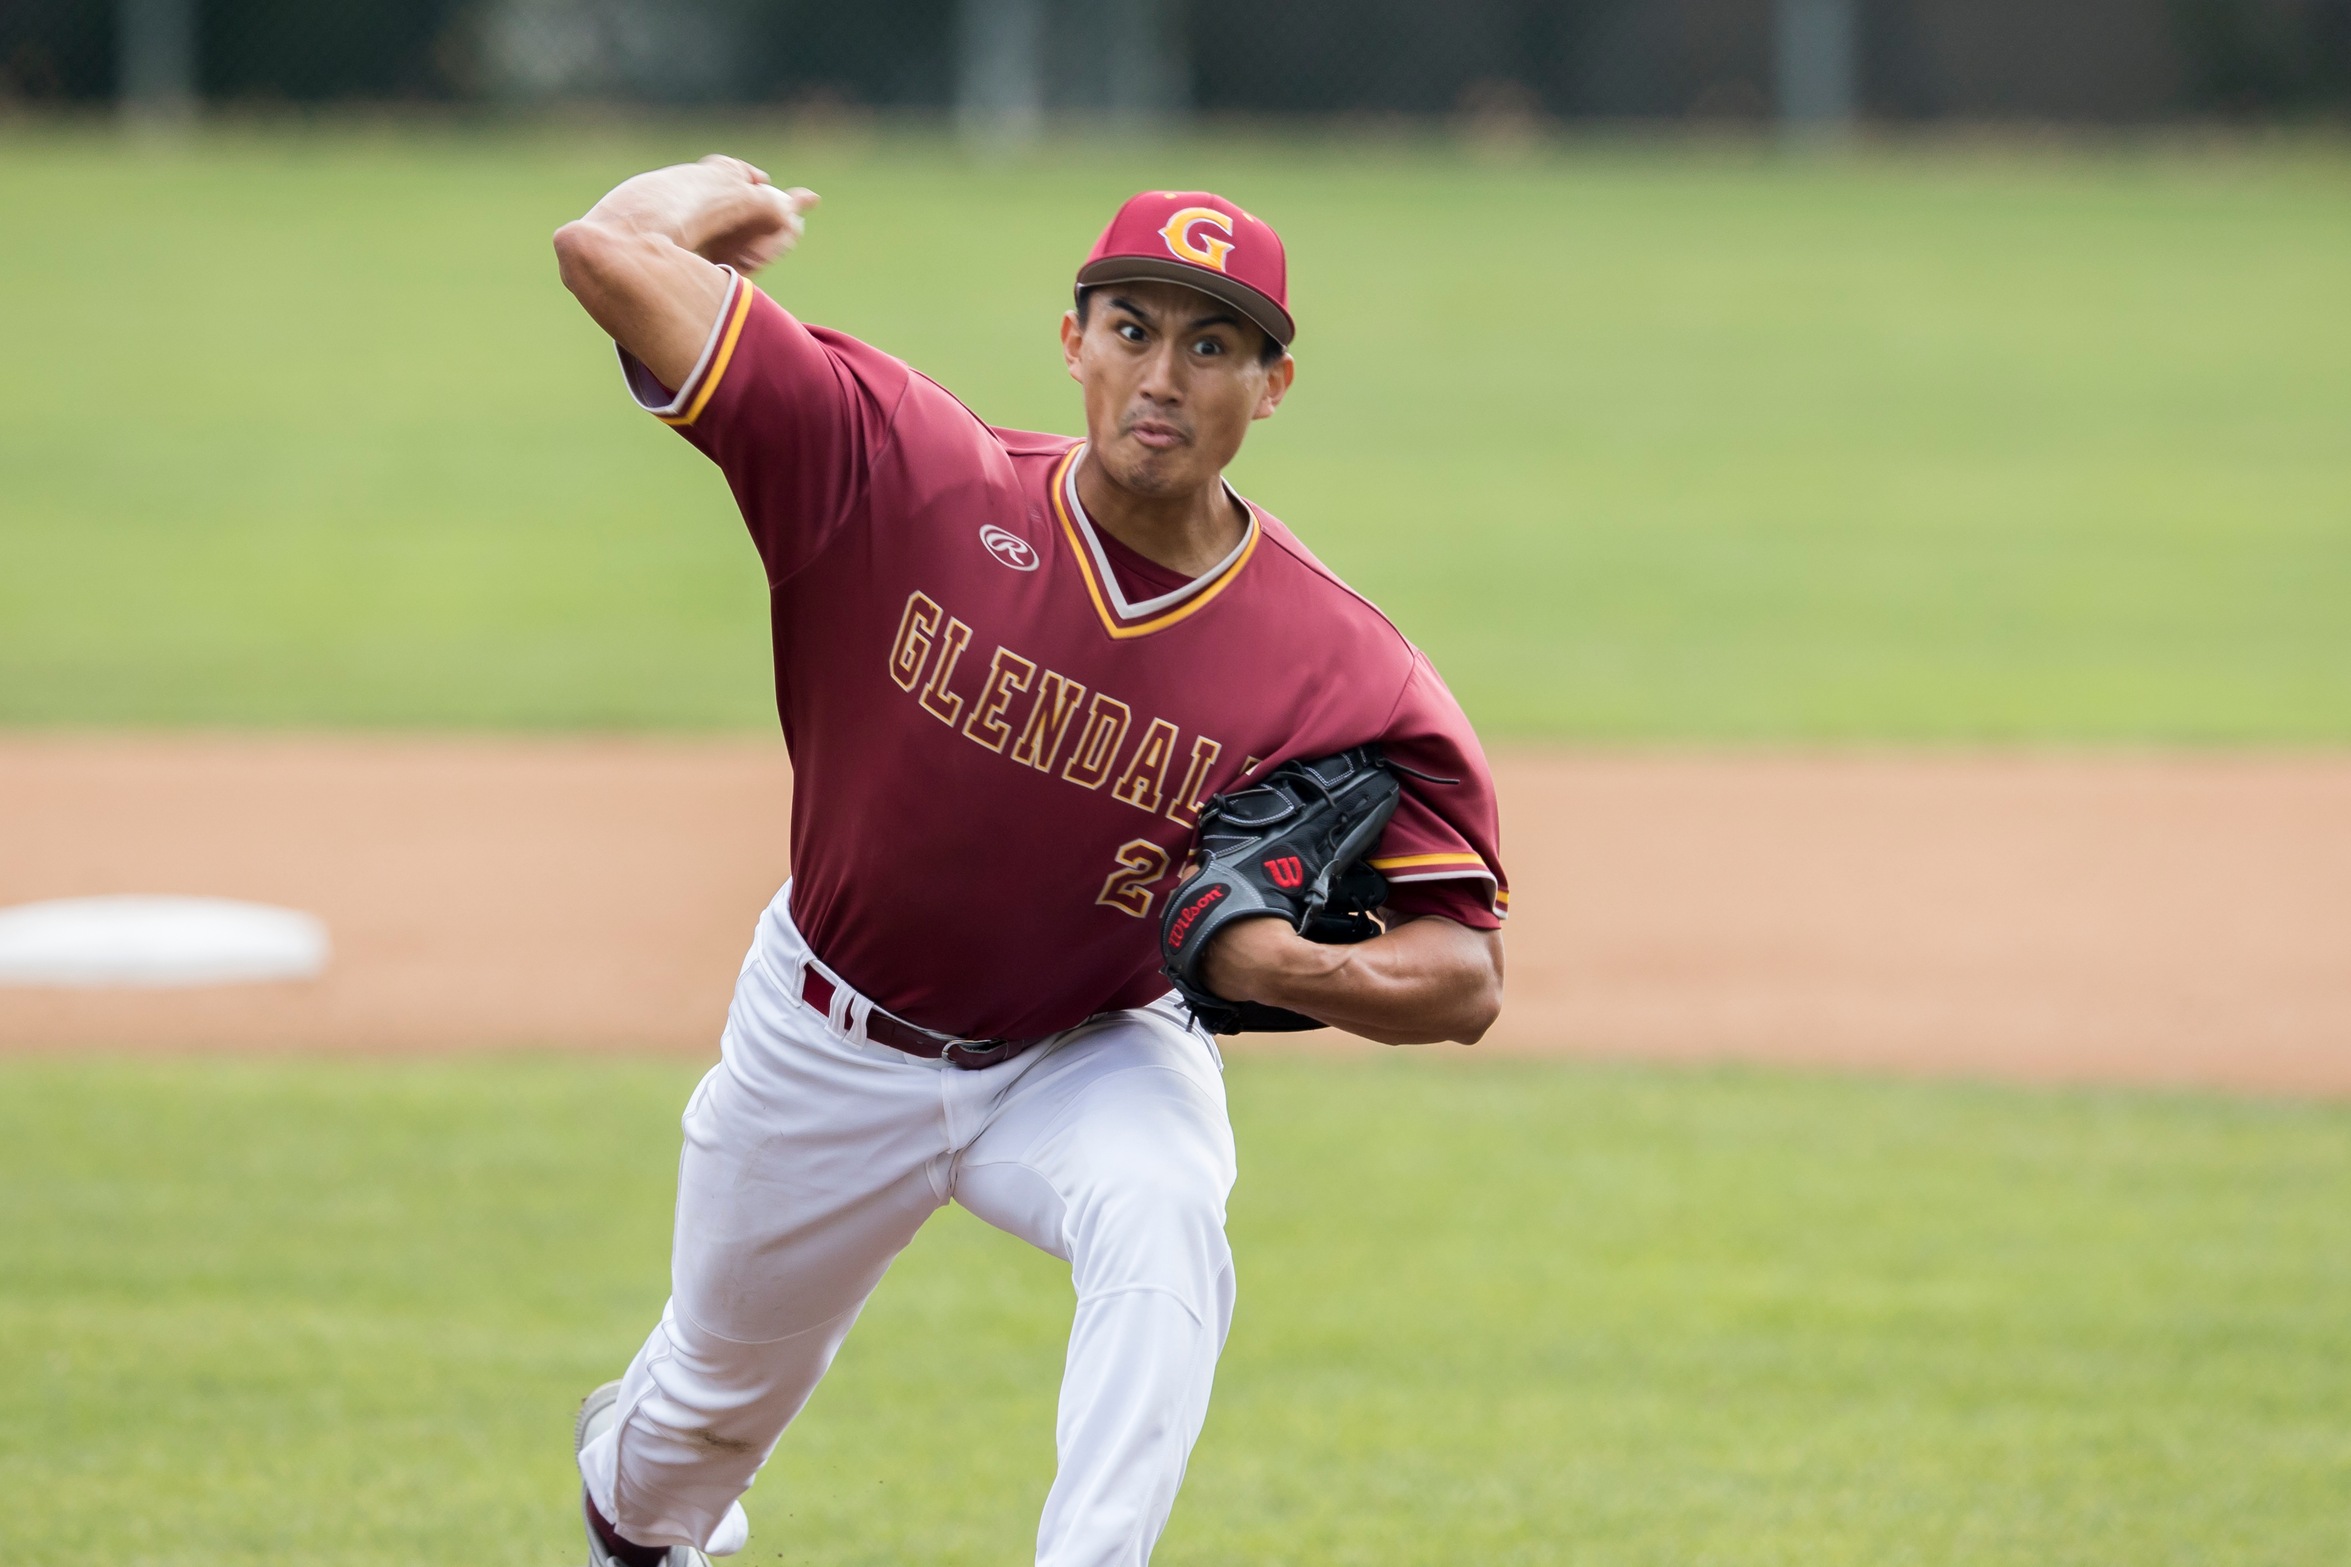 Kenji Pallares and Adrian Gonzales paced Glendale to 9-6 win over Fullerton March 4